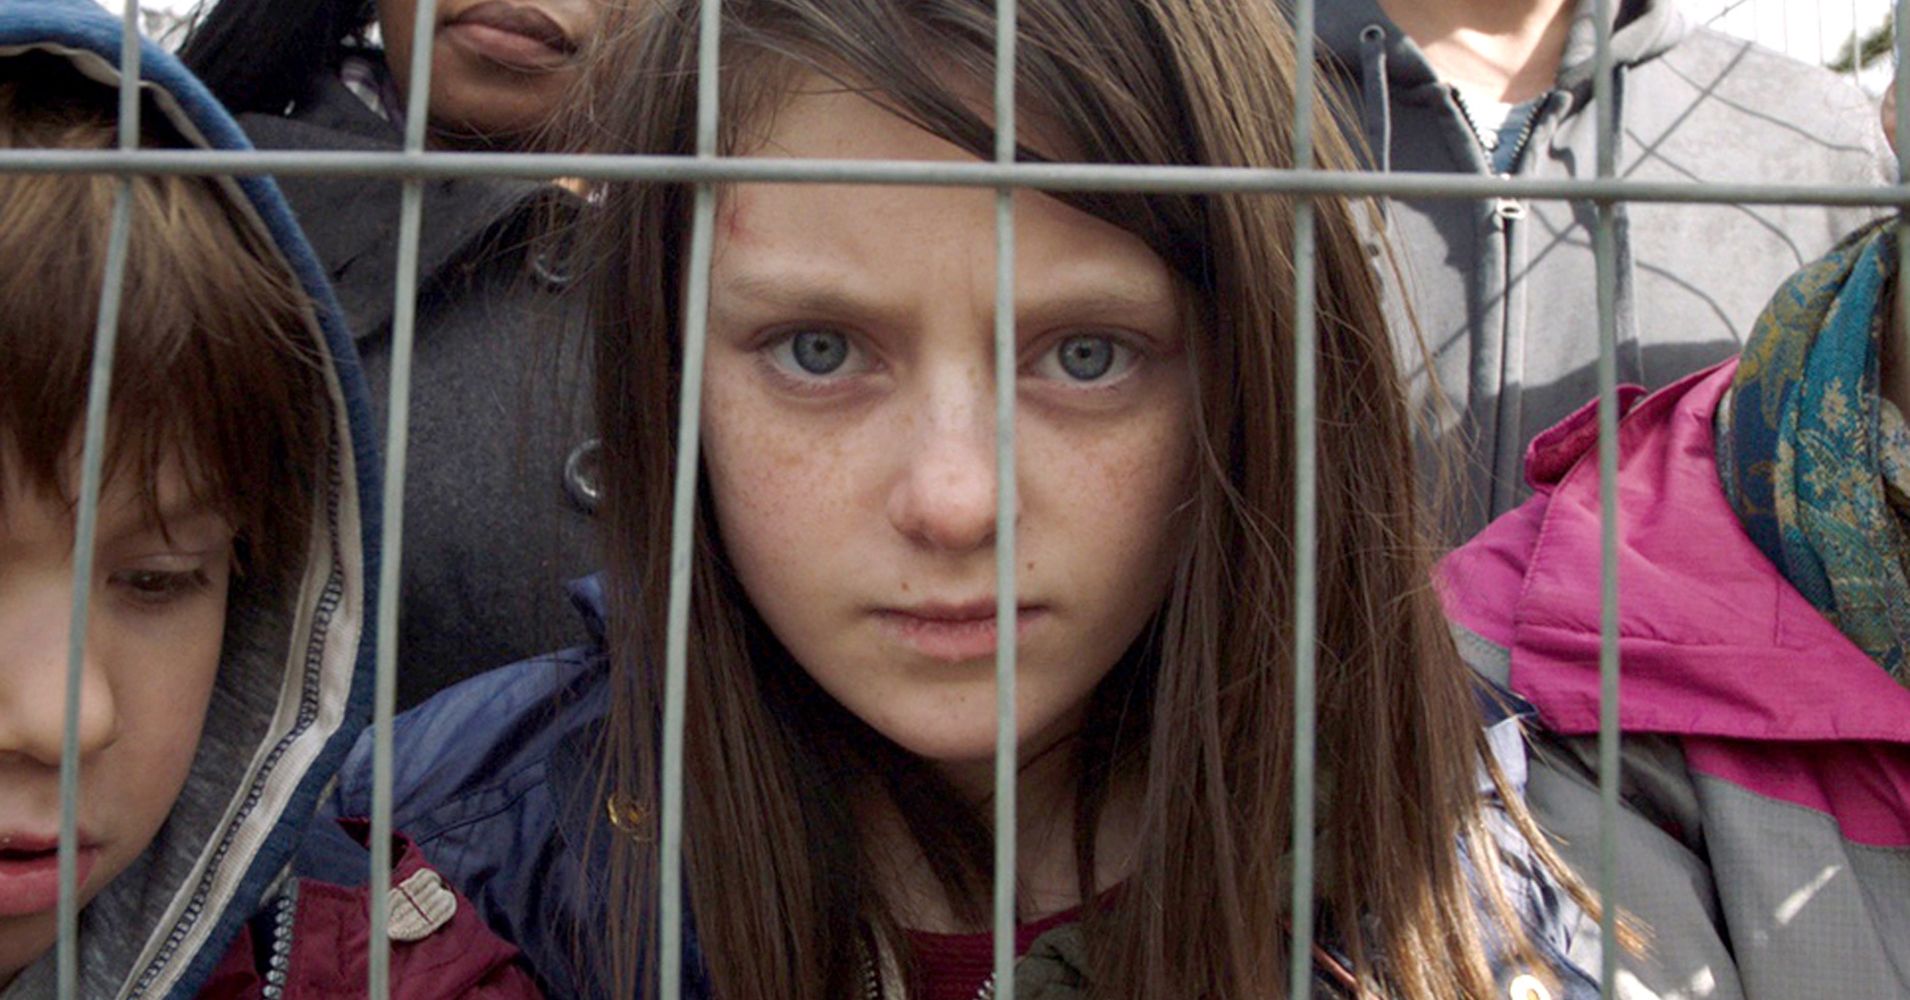 Chilling Video Reimagines Refugee Girl Fleeing England As If It Were Syria Huffpost